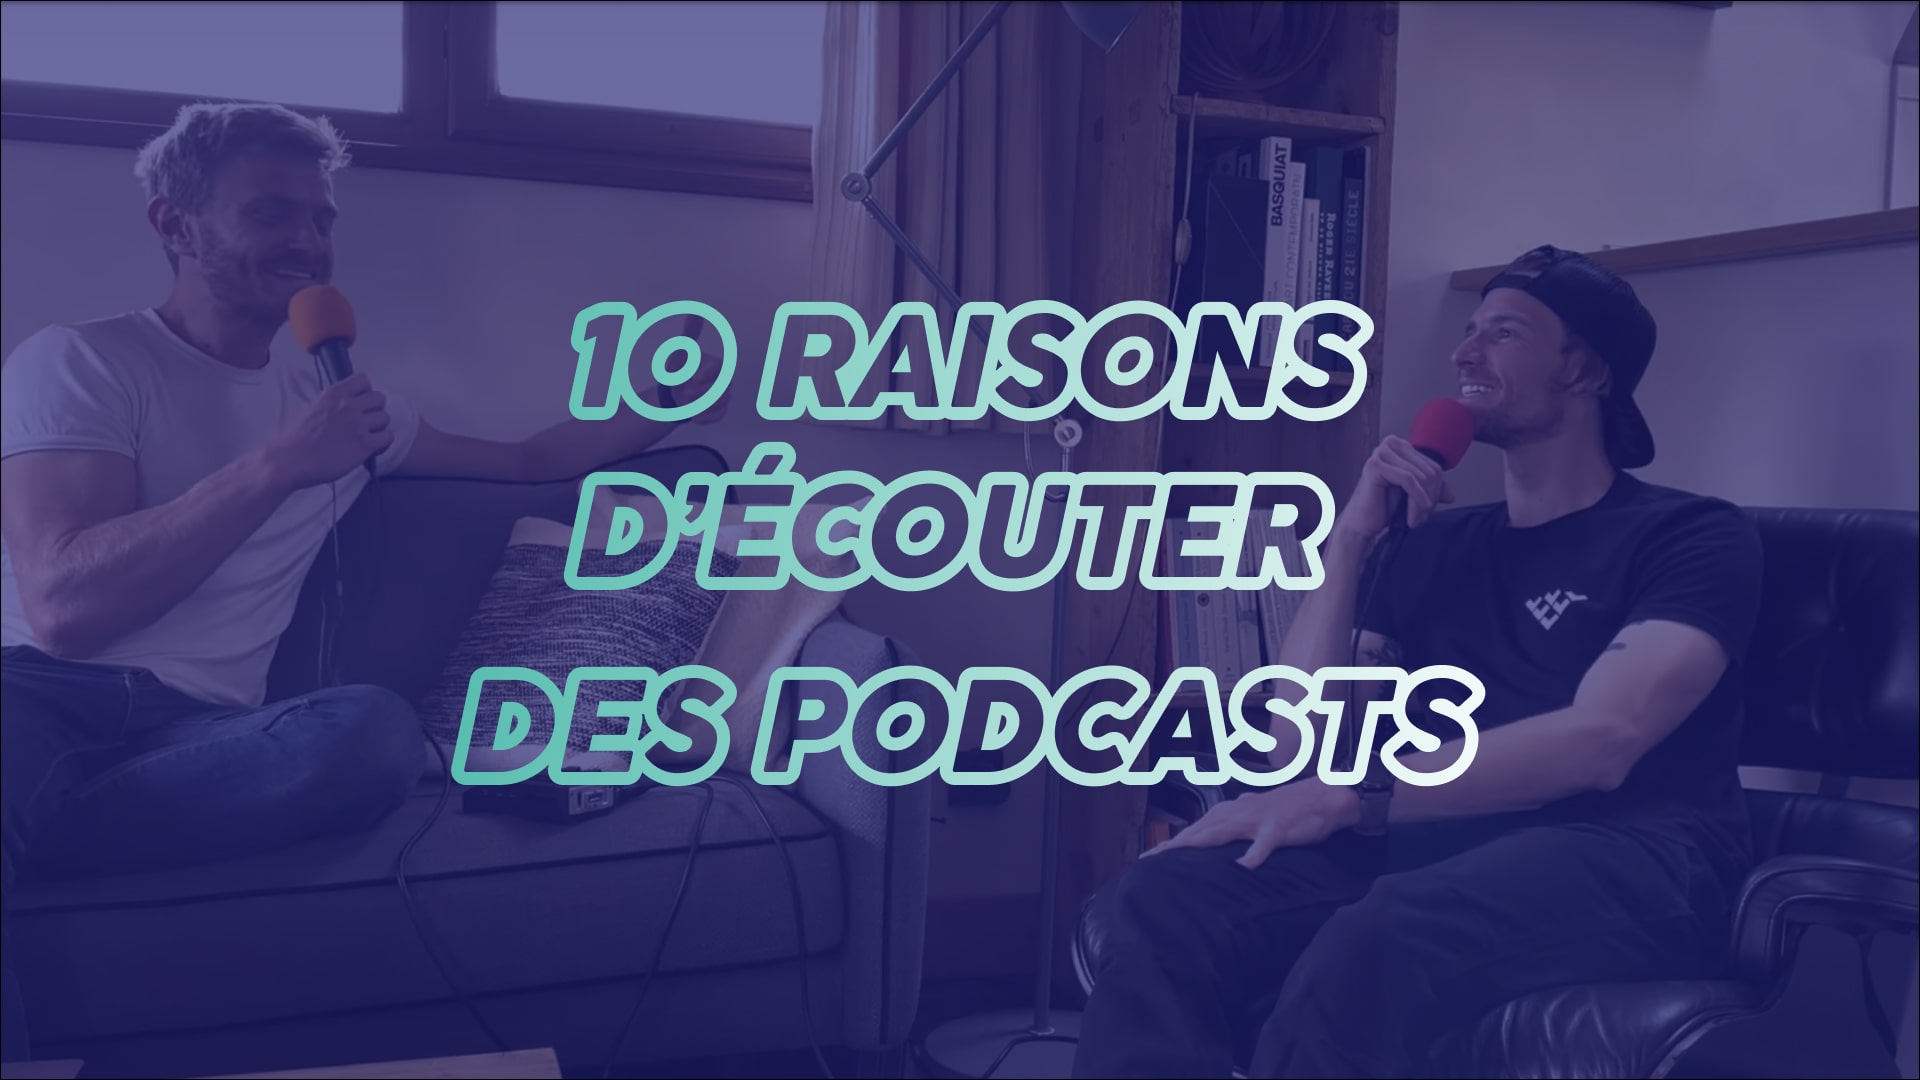 You are currently viewing 10 raisons d’écouter des podcasts